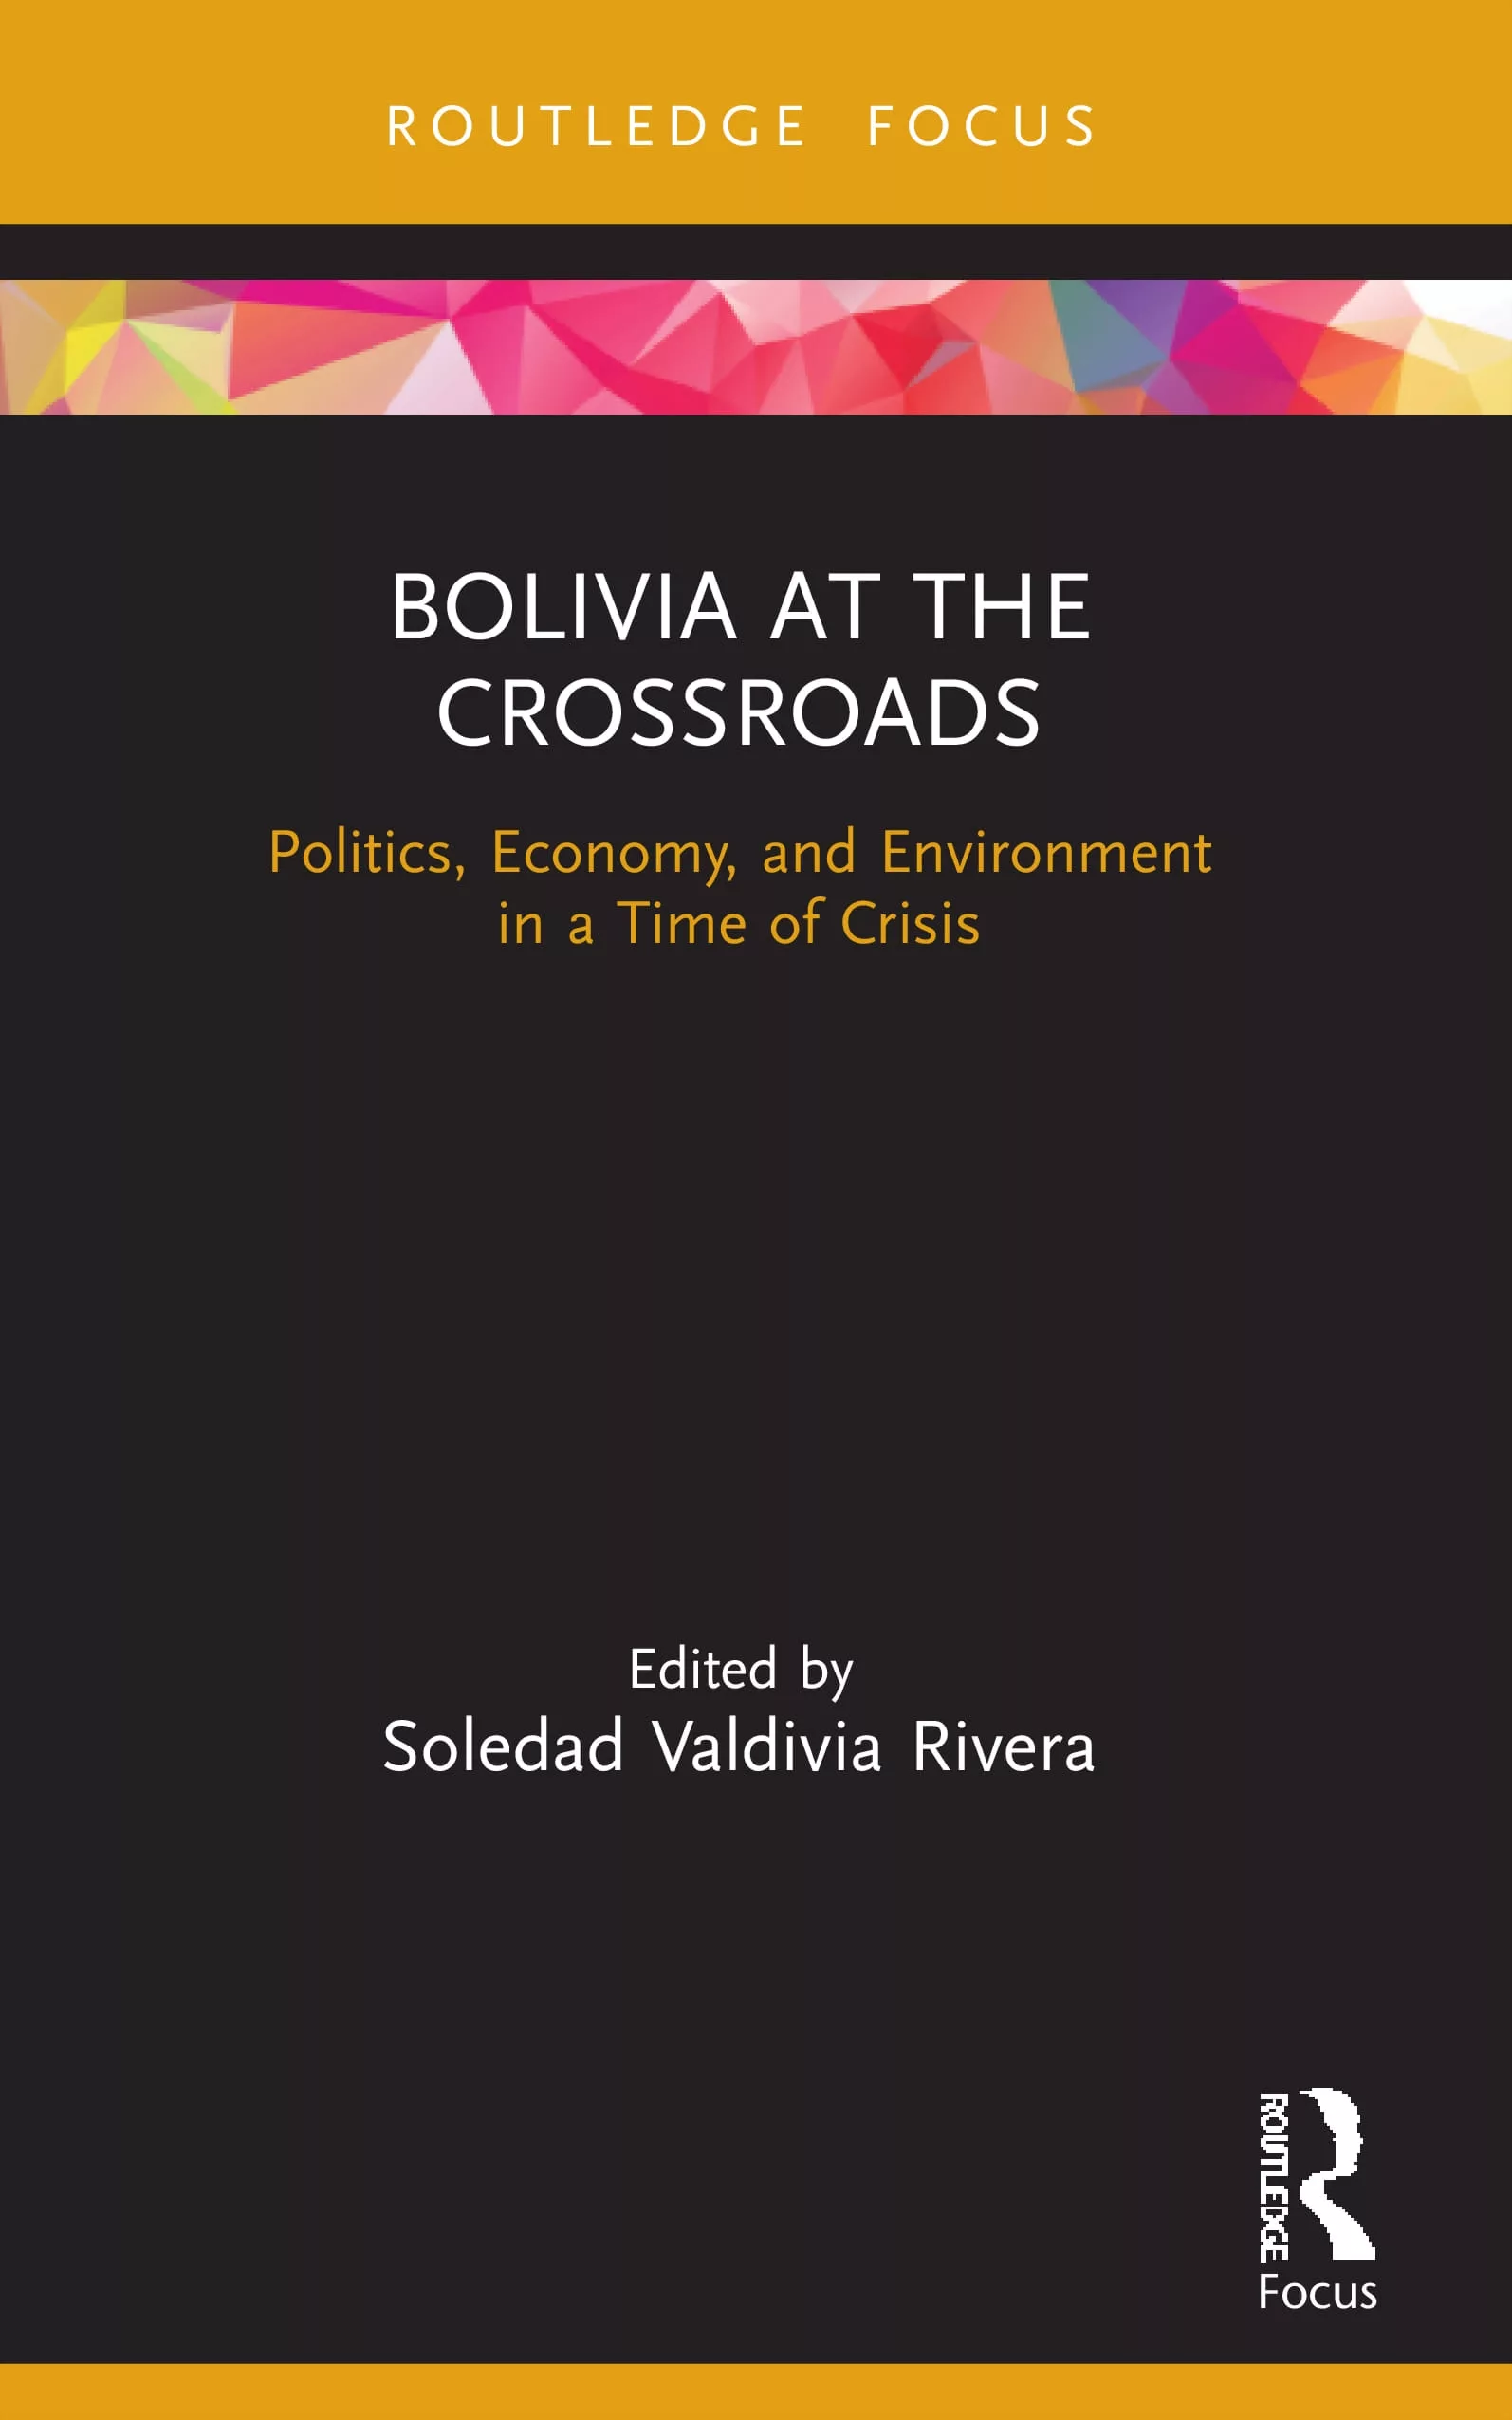 Bolivia at the Crossroads: Politics, Economy, and Environment in a Time of Crisis